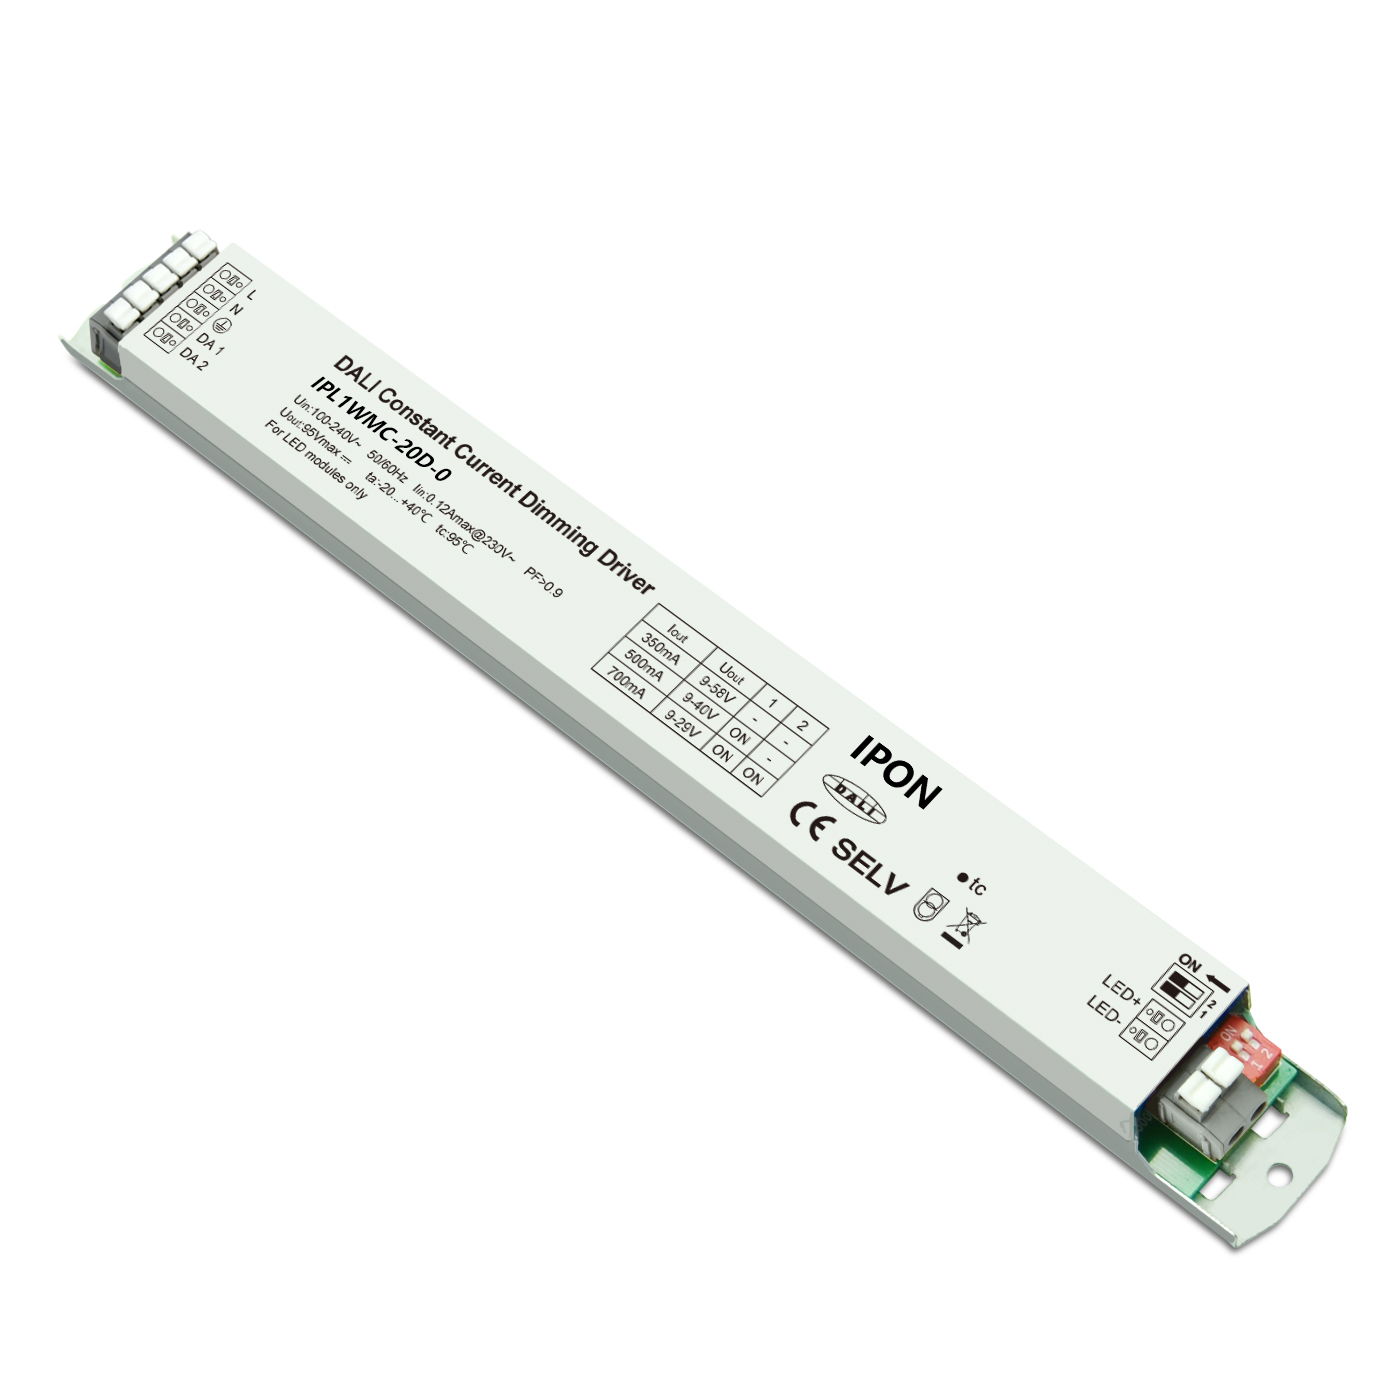 news-DALI dimmable led driver supplier for Lighting control system-IPON LED-img